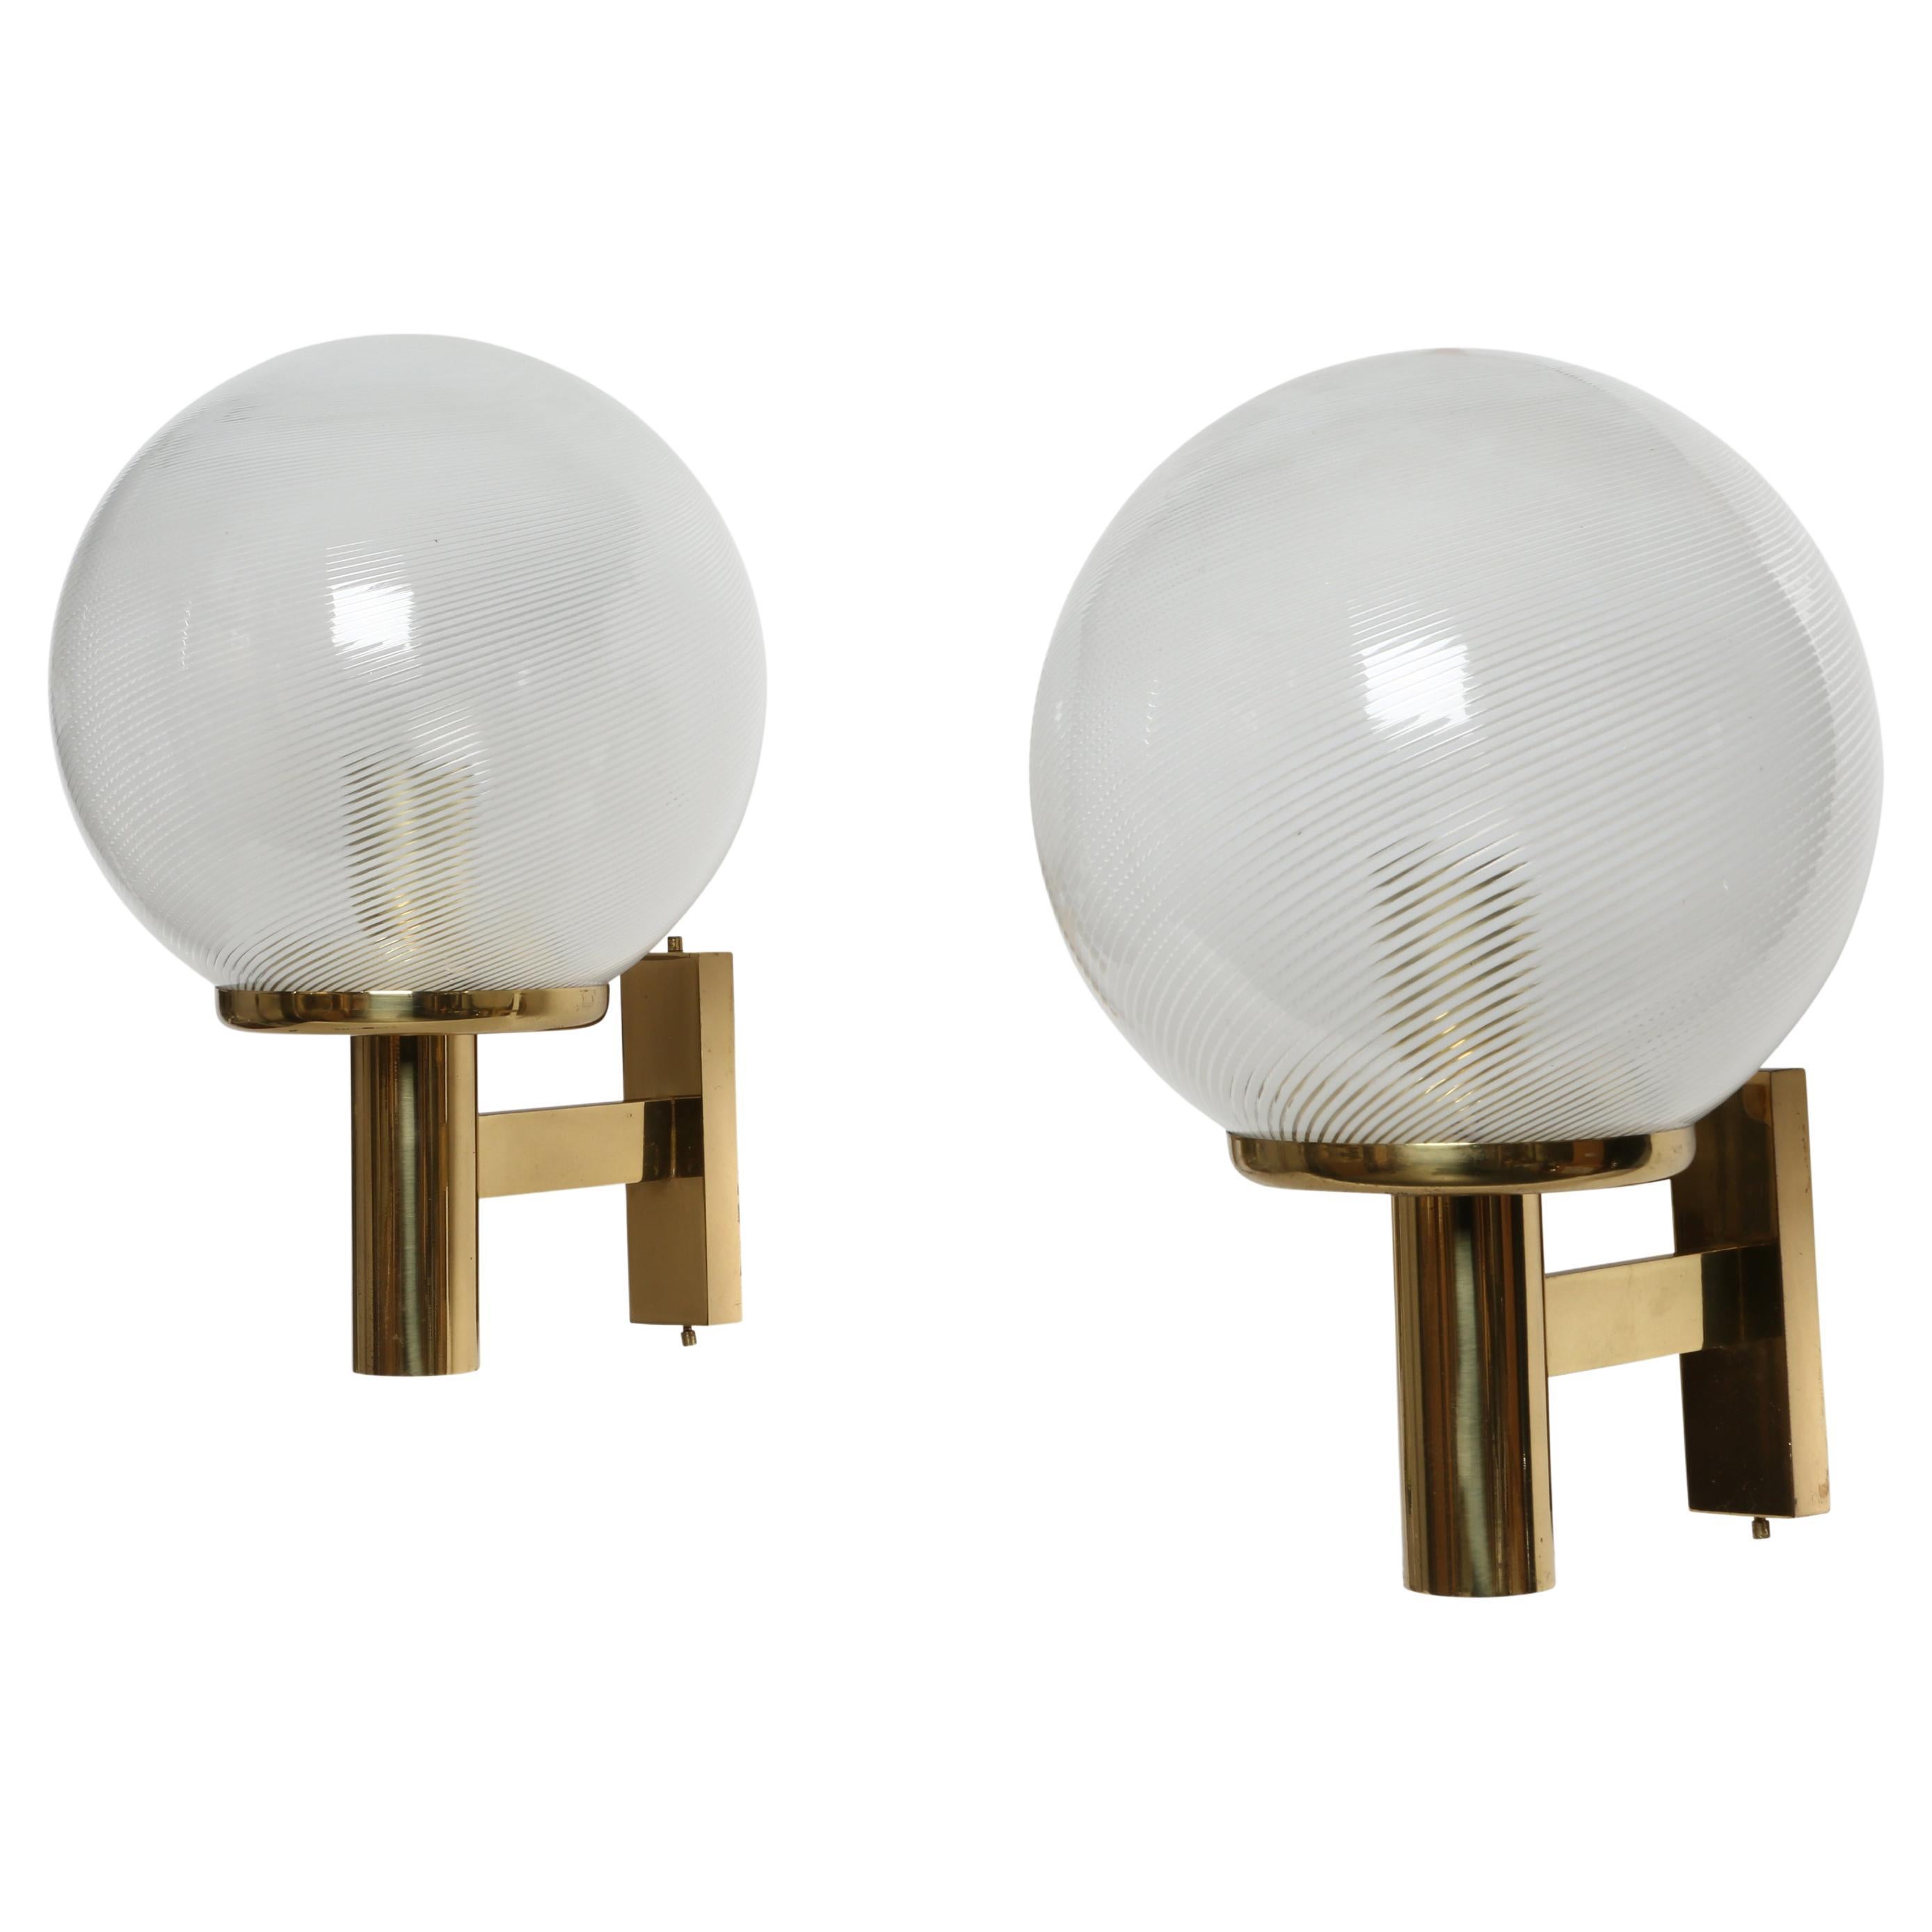 Murano Glass Sconces by Venini, a Pair Attributed